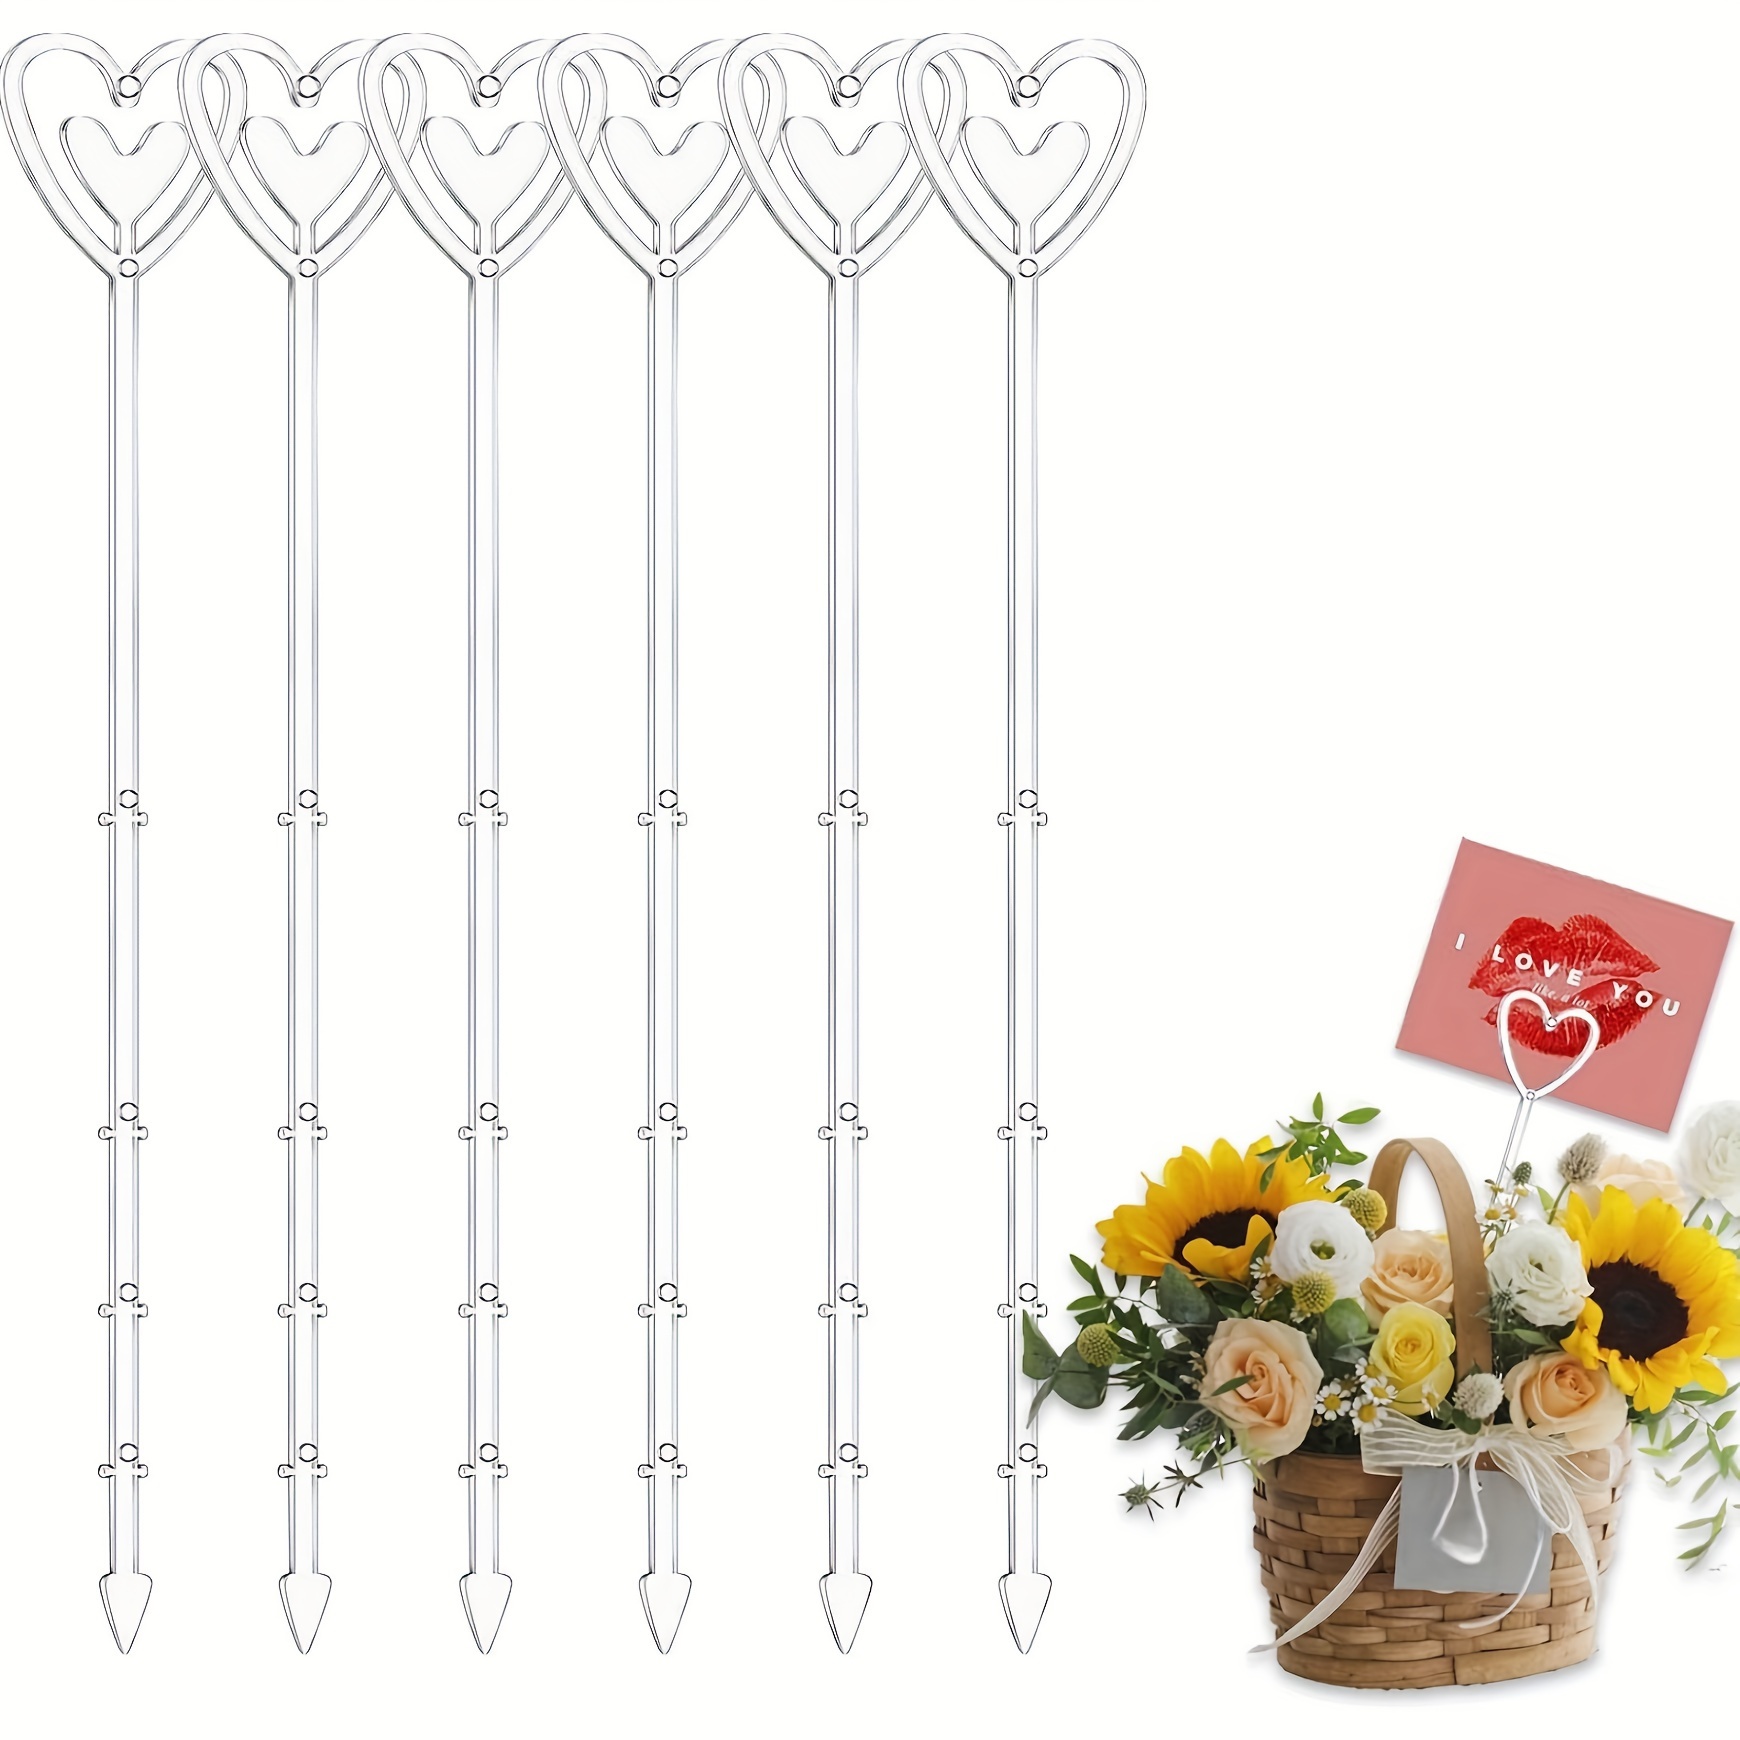 100 Pieces Plastic Clear Floral Picks Card Holders Heart Head Flower  Pickers Card Holders For Wedding, Birthday Parties, Events, Decorations